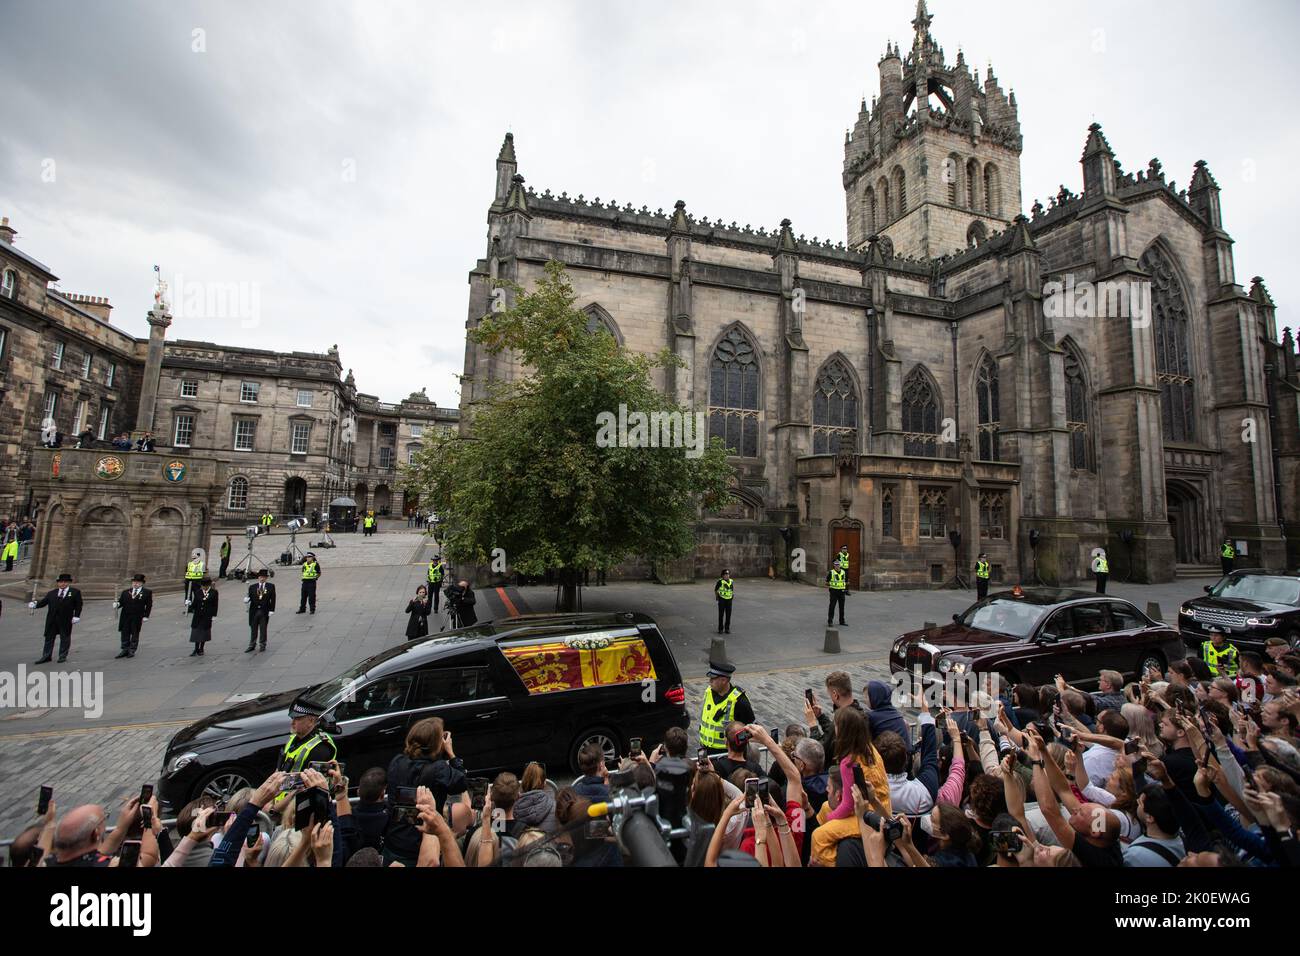 Edinburgh, Scotland, 11 September 2022.  The cortege carrying the coffin of Her Majesty Queen Elizabeth II drives down the Royal Mile High Street passing St Giles Cathedral, and the Mercat Cross, in Edinburgh, Scotland, 11 September 2022. Photo credit: Jeremy Sutton-Hibbert/ Alamy Live news. Stock Photo